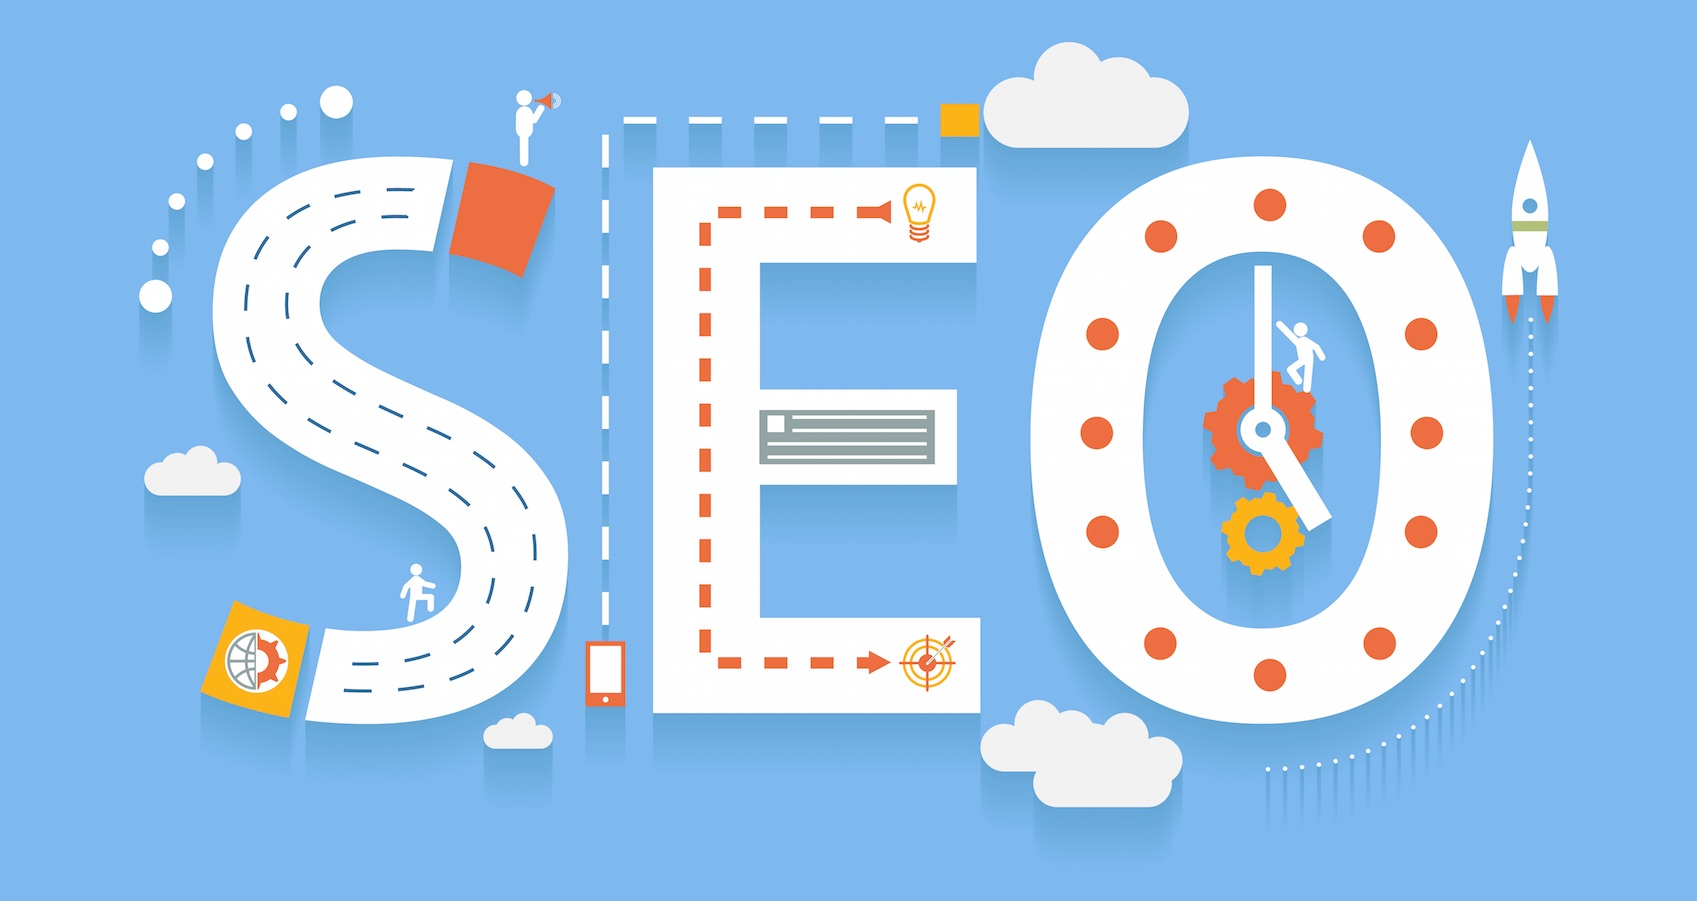 16 Most Effective SEO Tips – Infographic